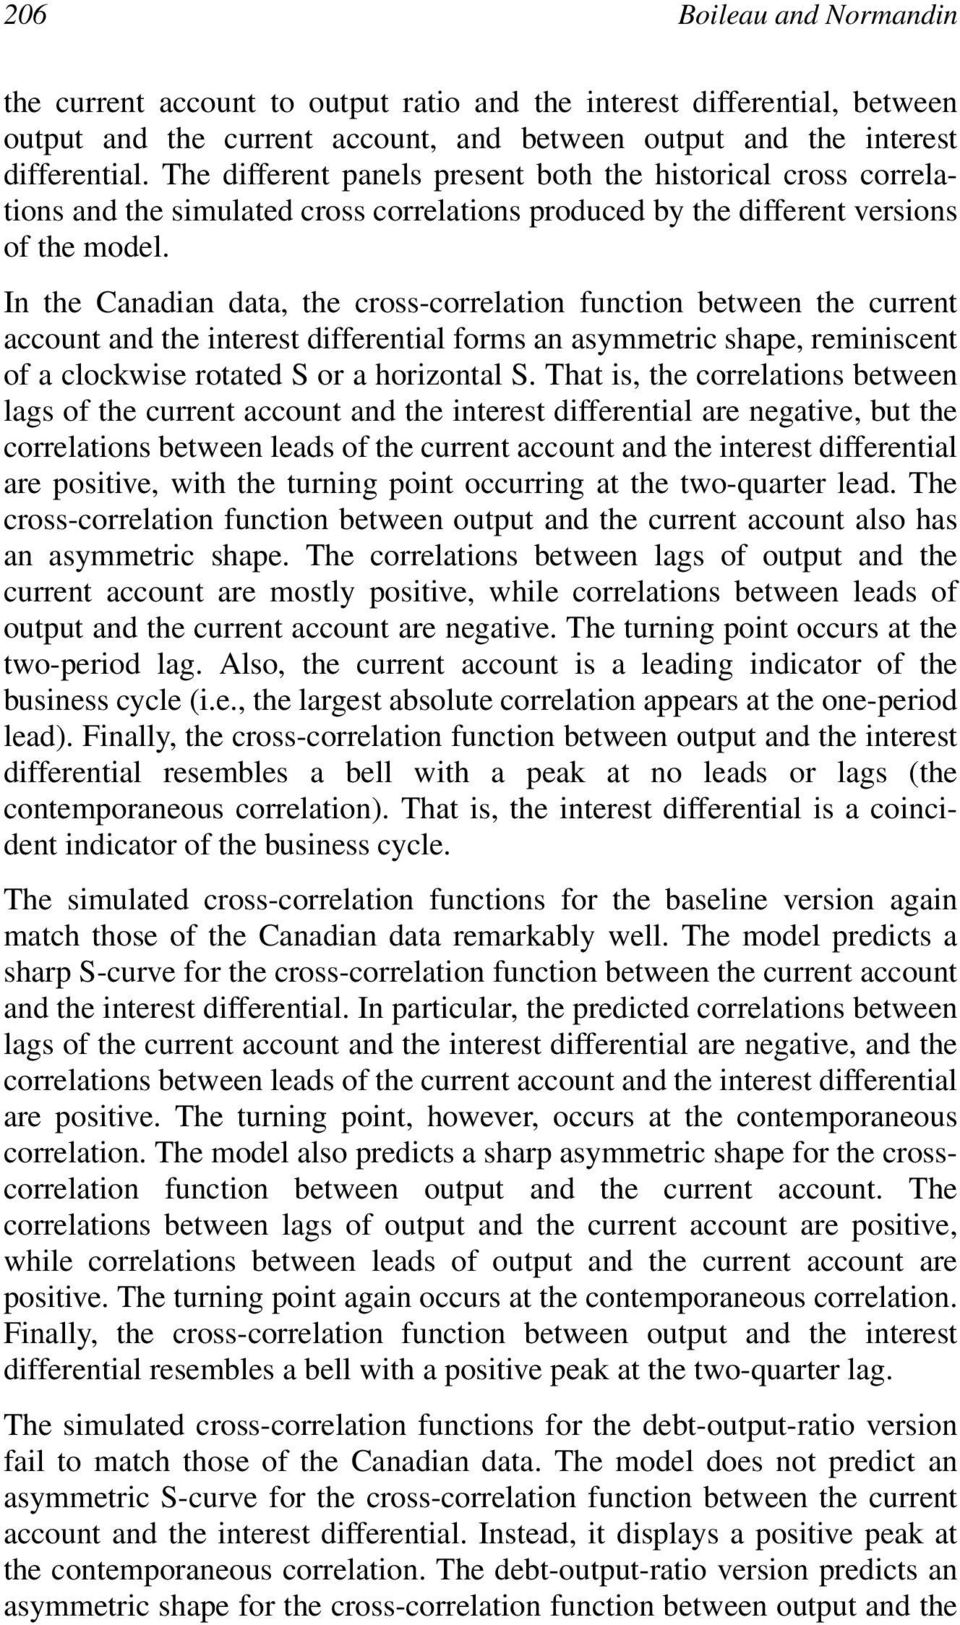 In the Canadian data, the cross-correlation function between the current account and the interest differential forms an asymmetric shape, reminiscent of a clocwise rotated S or a horizontal S.